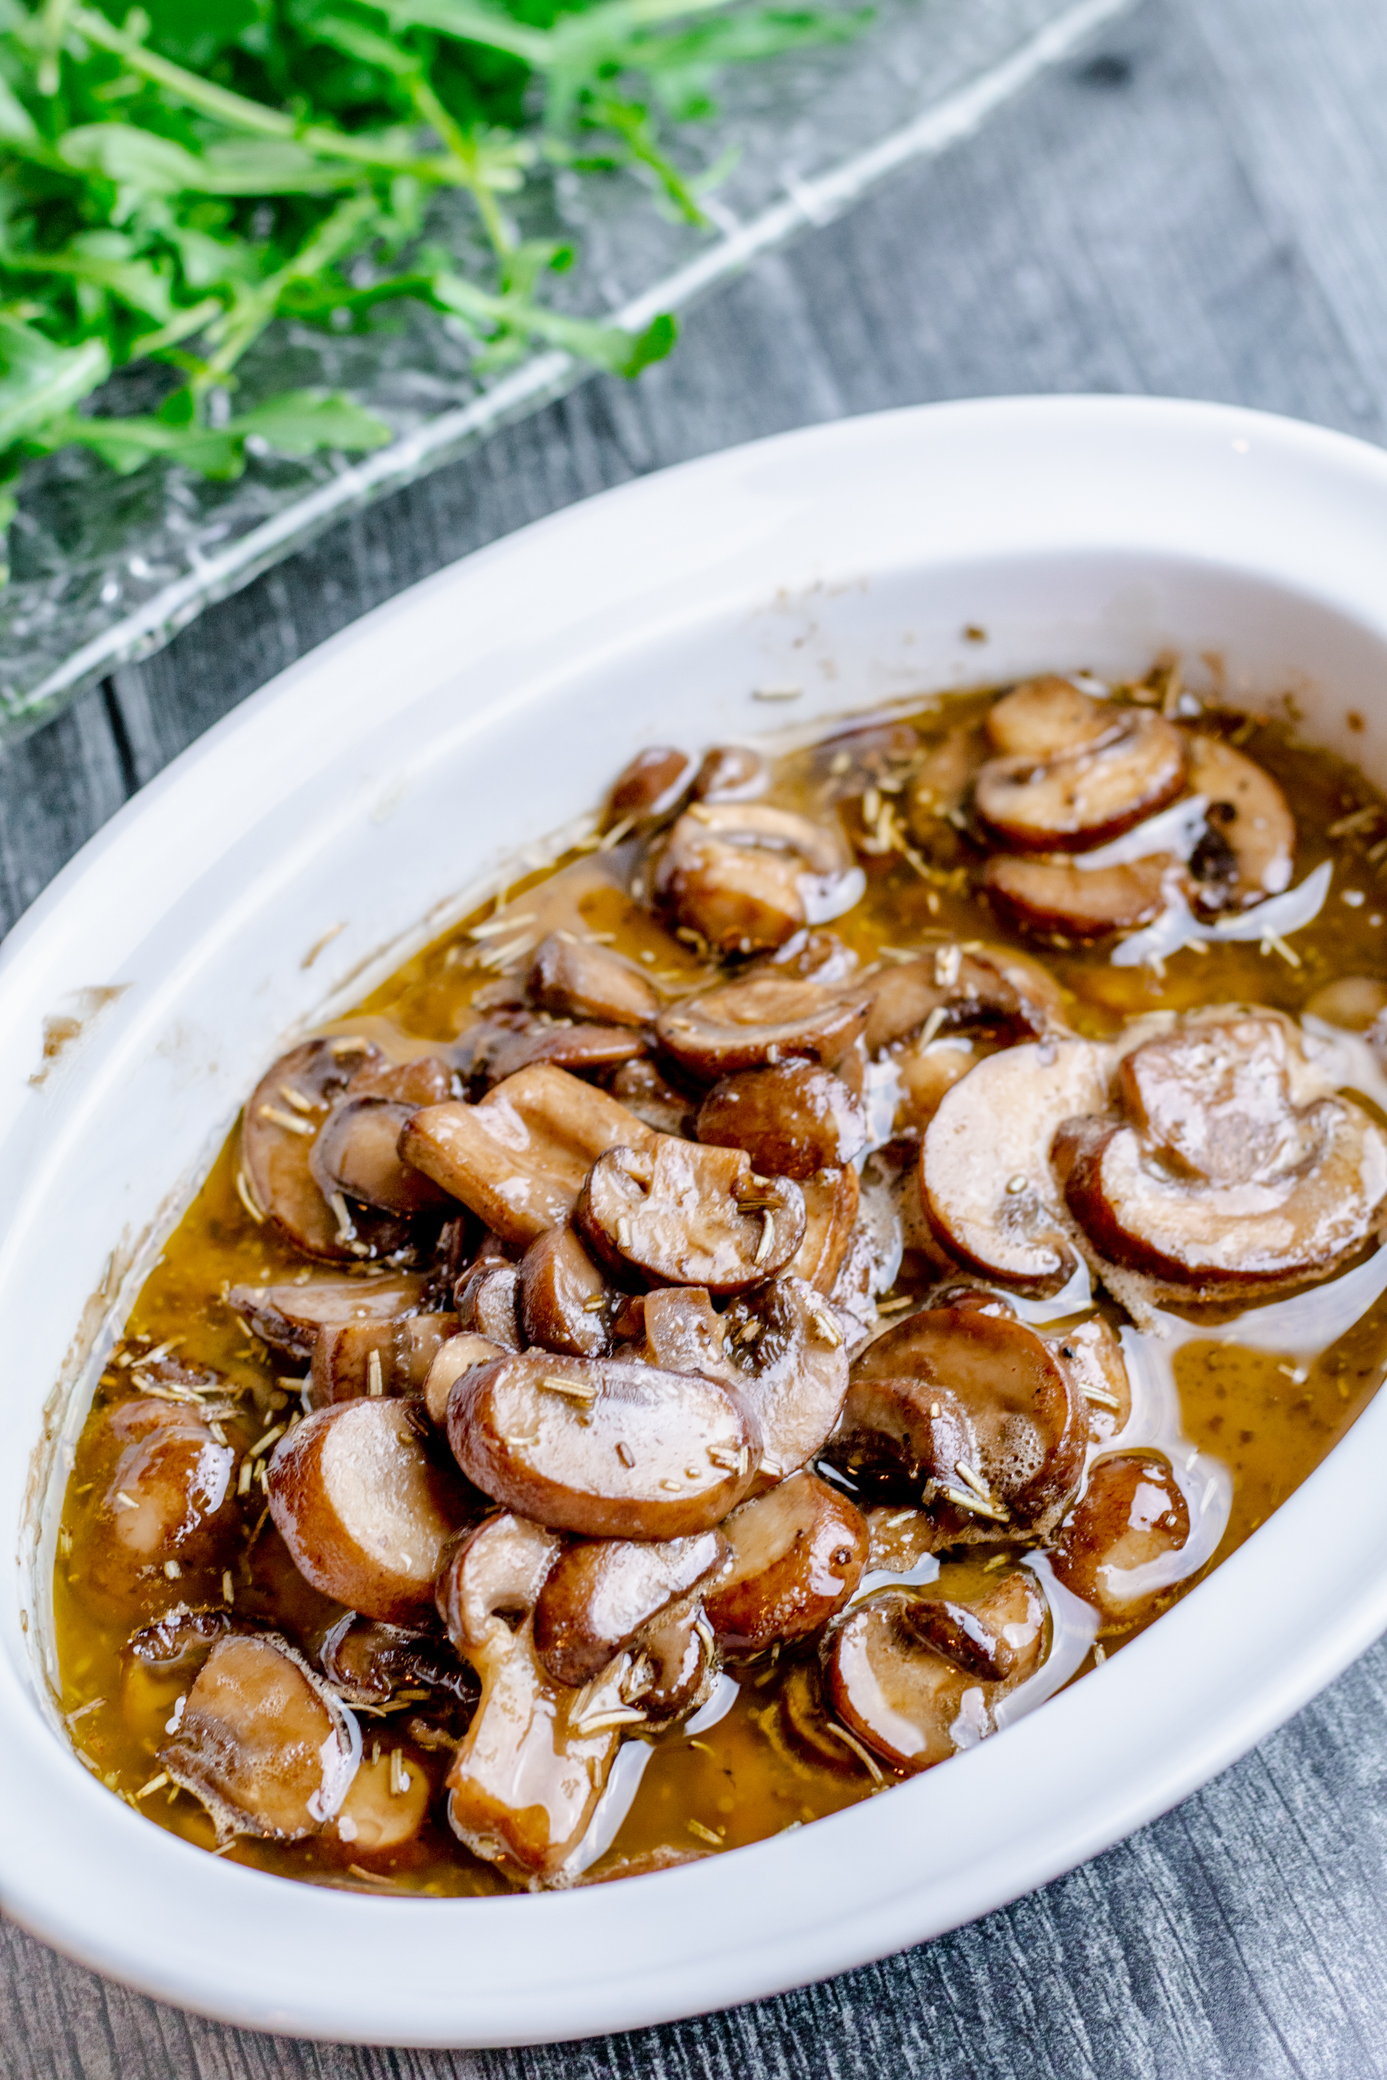 serving bowl filed with mushrooms smothered in detroit zip sauce